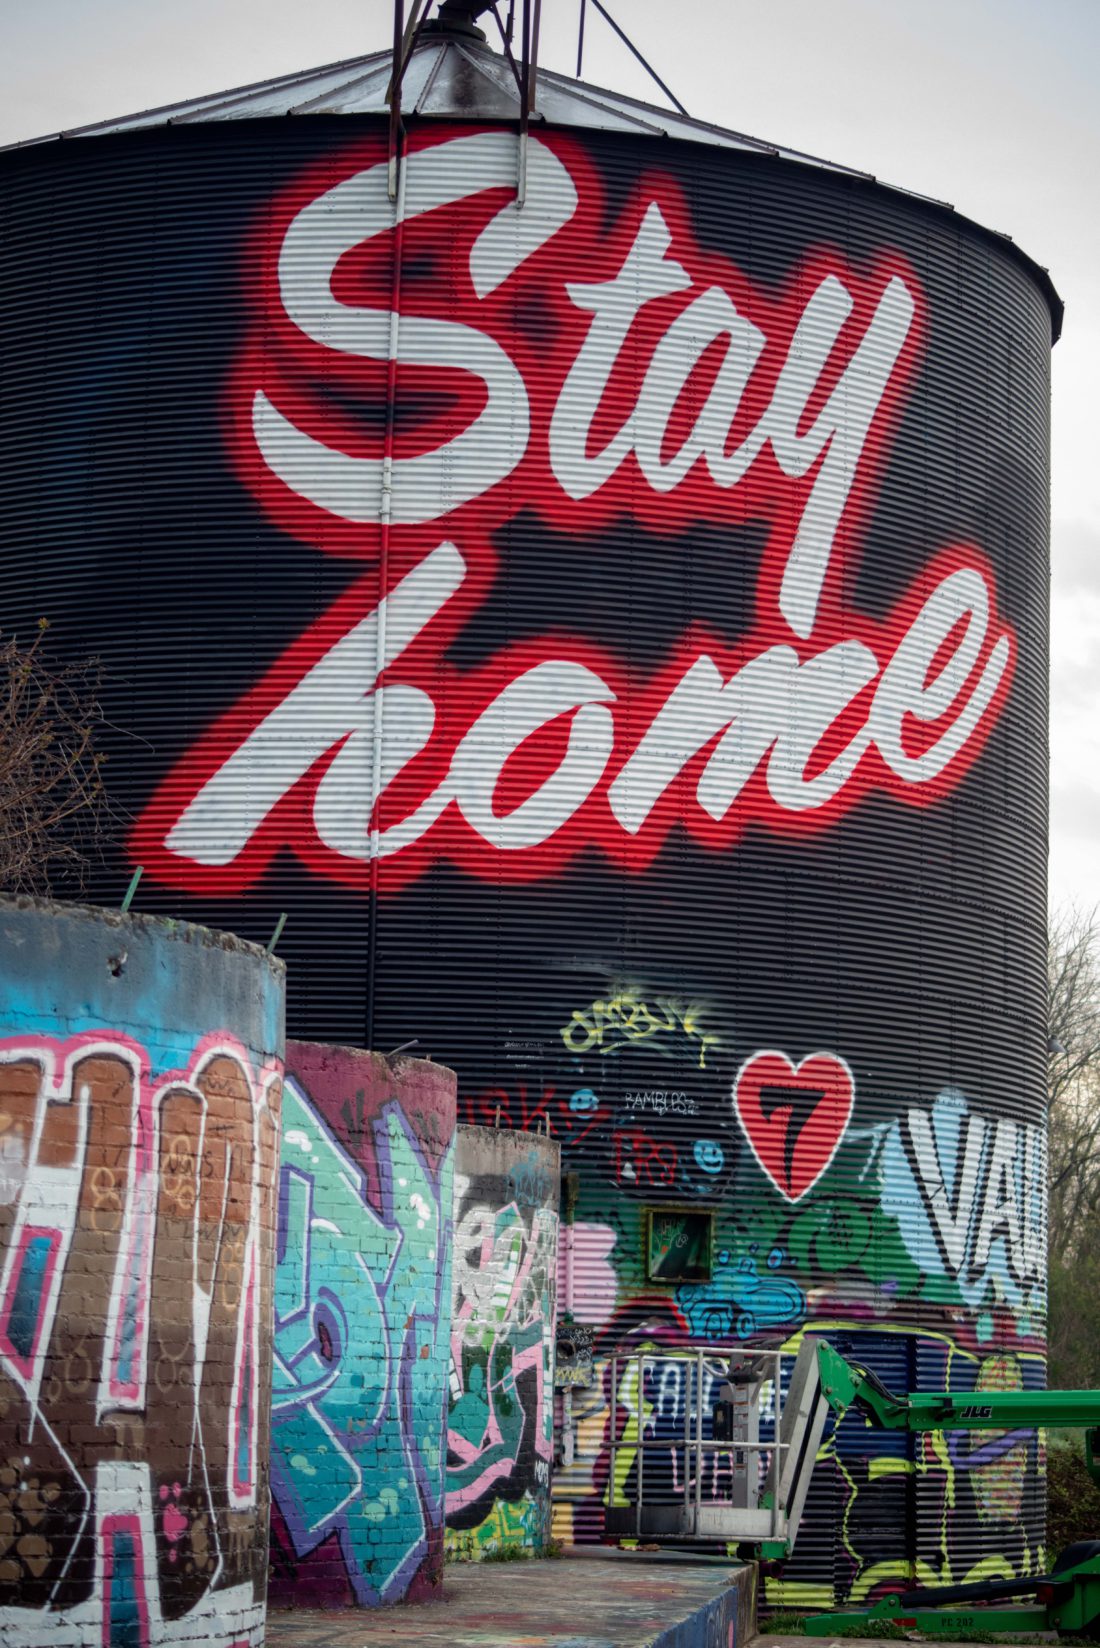 Stay Home tower in River Arts District